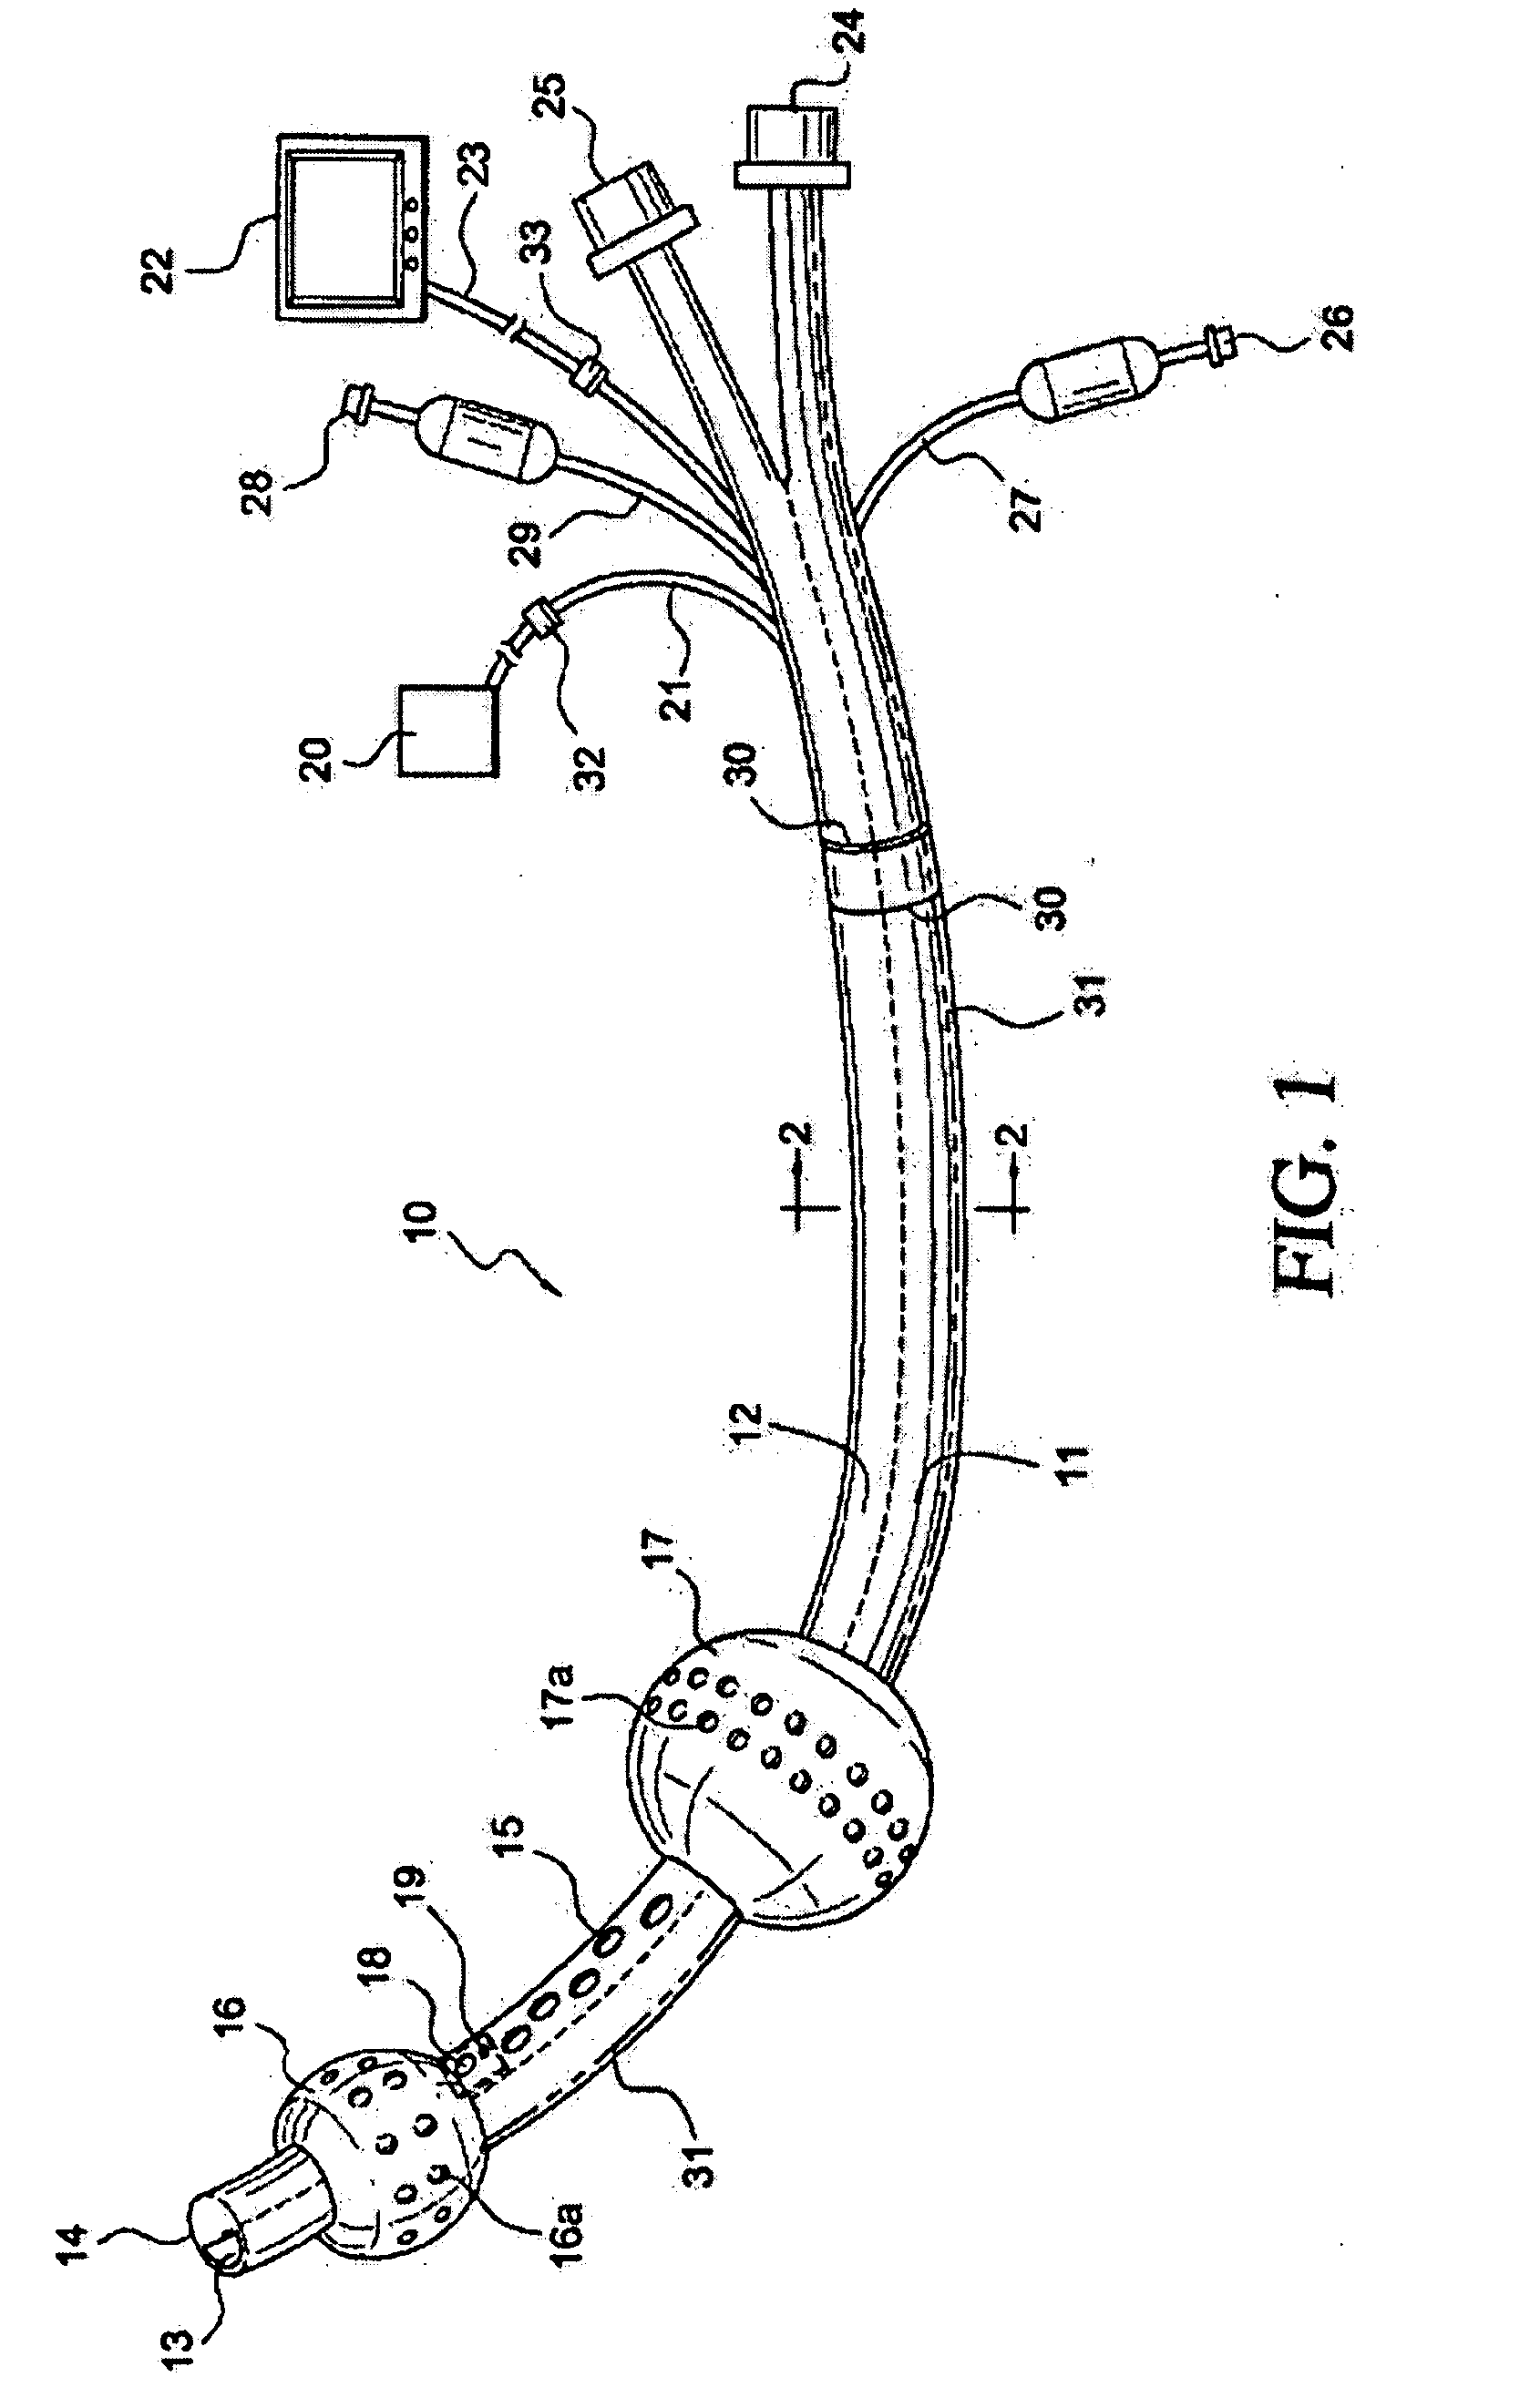 Visualization airway apparatus and methods for selective lung ventilation